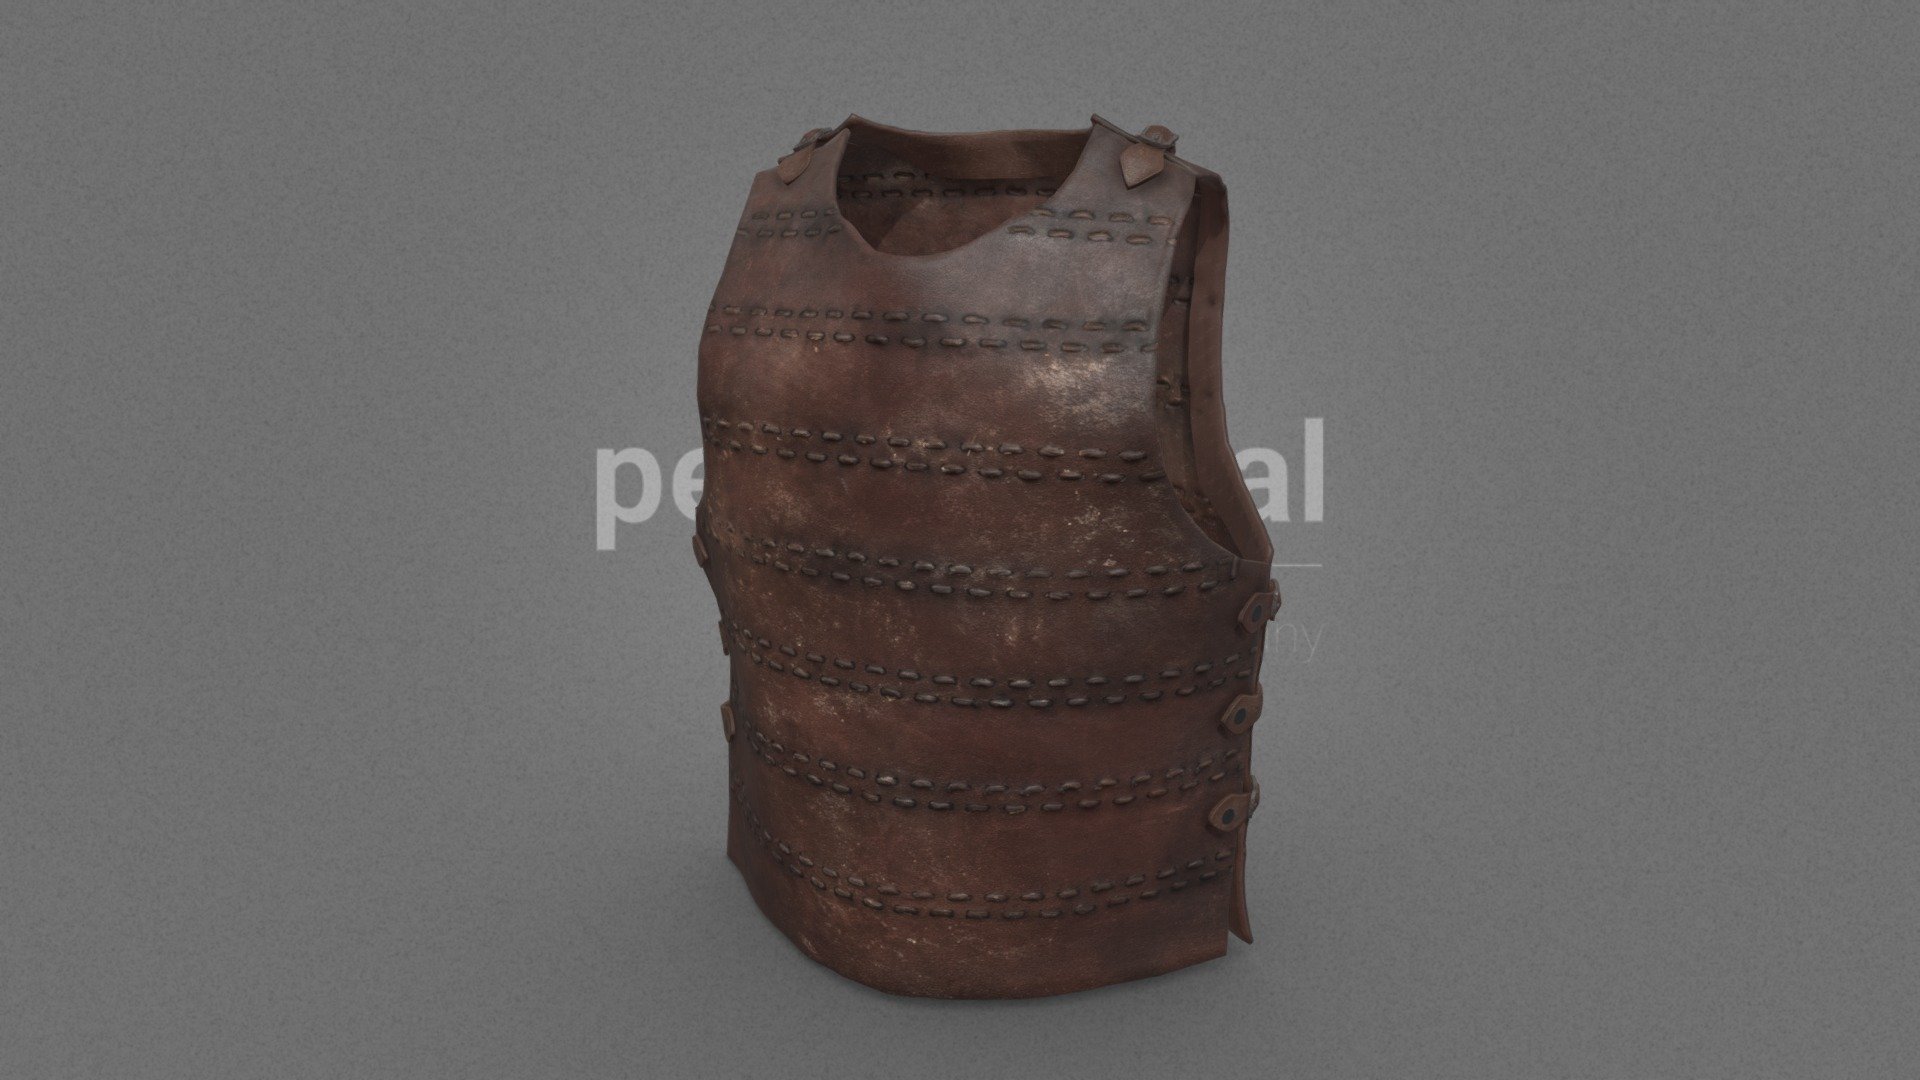 Leather cuirass armor

We are Peris Digital, and we make RAW meshes (Photogrammetry) and Digital Doubles.

This is a RAW mesh, taken by our photogrammetry team in our RIG with 144 Sony Alpha cameras.
Check our web, make your selection and contact us to get your costume scanned or talk with us to take a Demo RAW mesh to download it.

Contact: info@peris.costumes - Leather Cuirass 03 - 3D model by Peris Digital (@perisdigital) 3d model